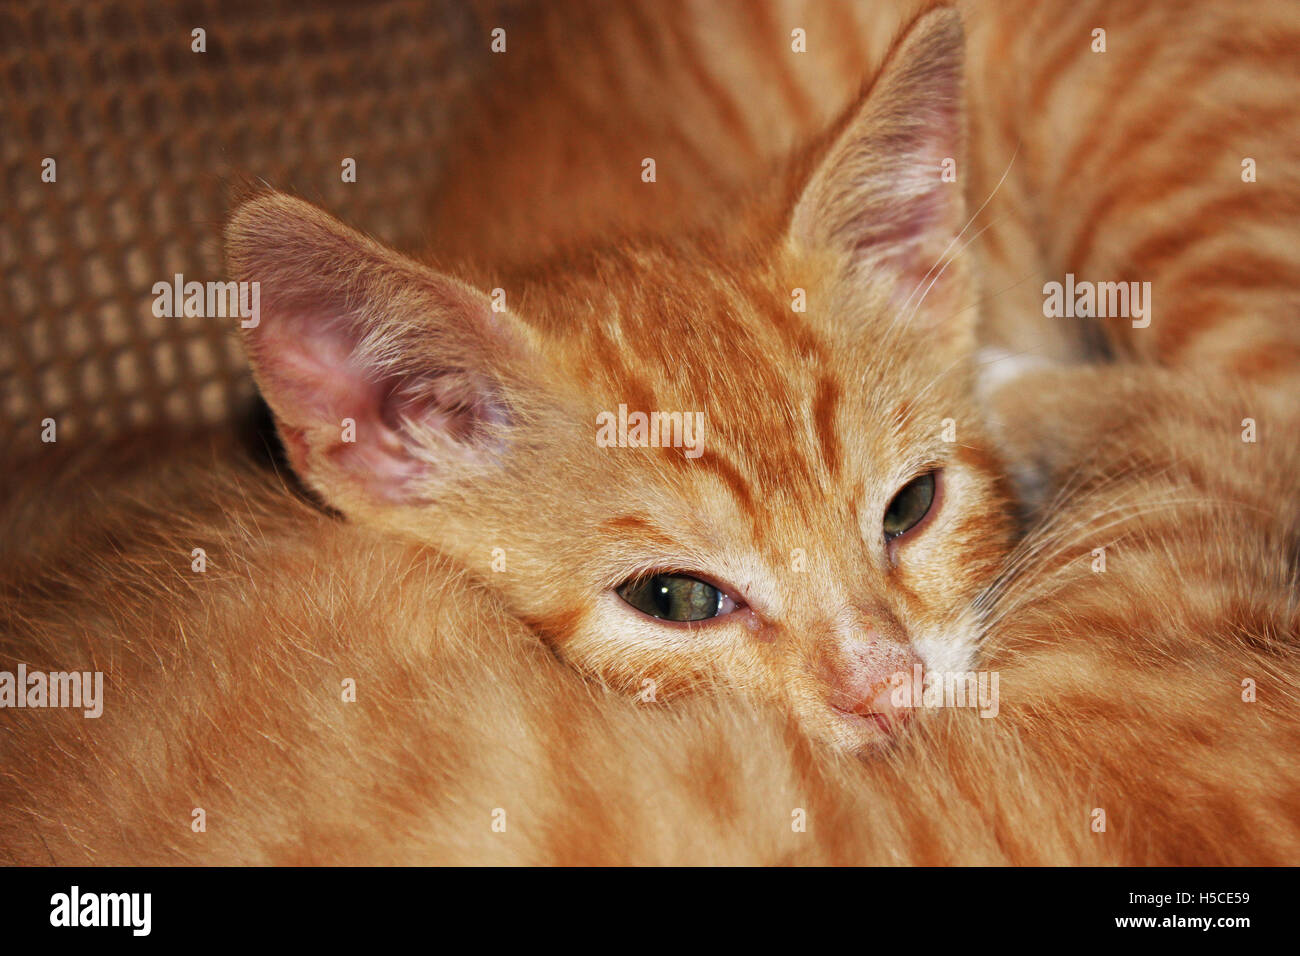 orange striped kittens sleeping with each other Stock Photo